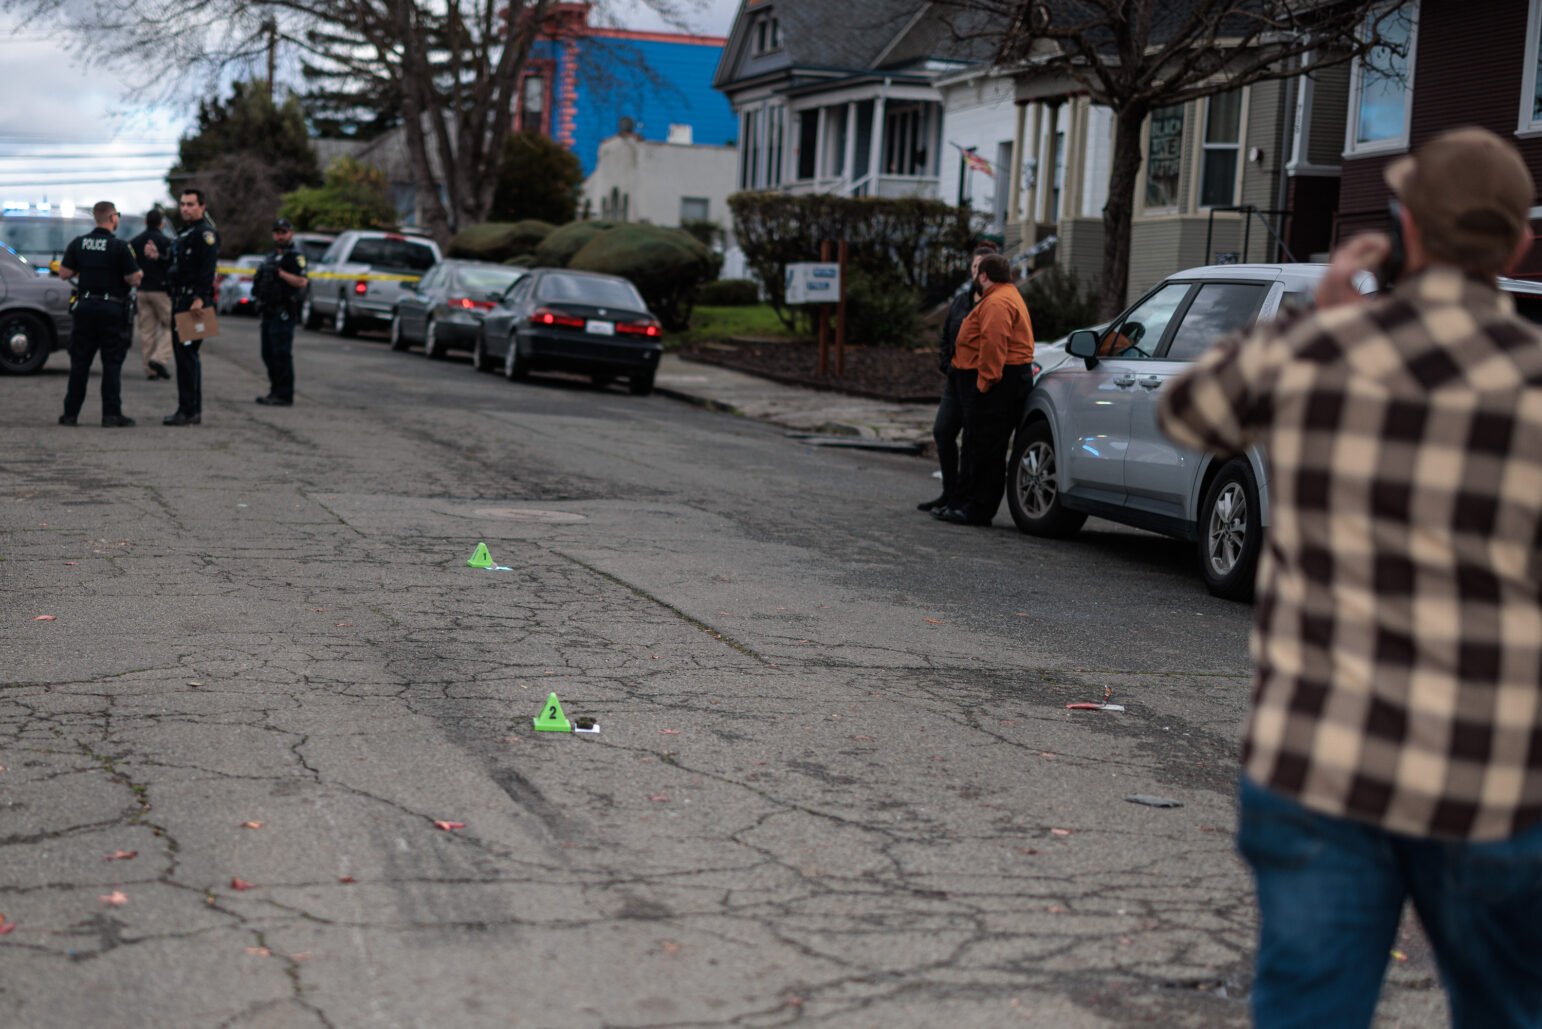 A Vallejo police detective talks on a cell phone near a group of other officers while standing in the middle of a residential street during the daytime. Two bright green evidence placards can be seen center frame.